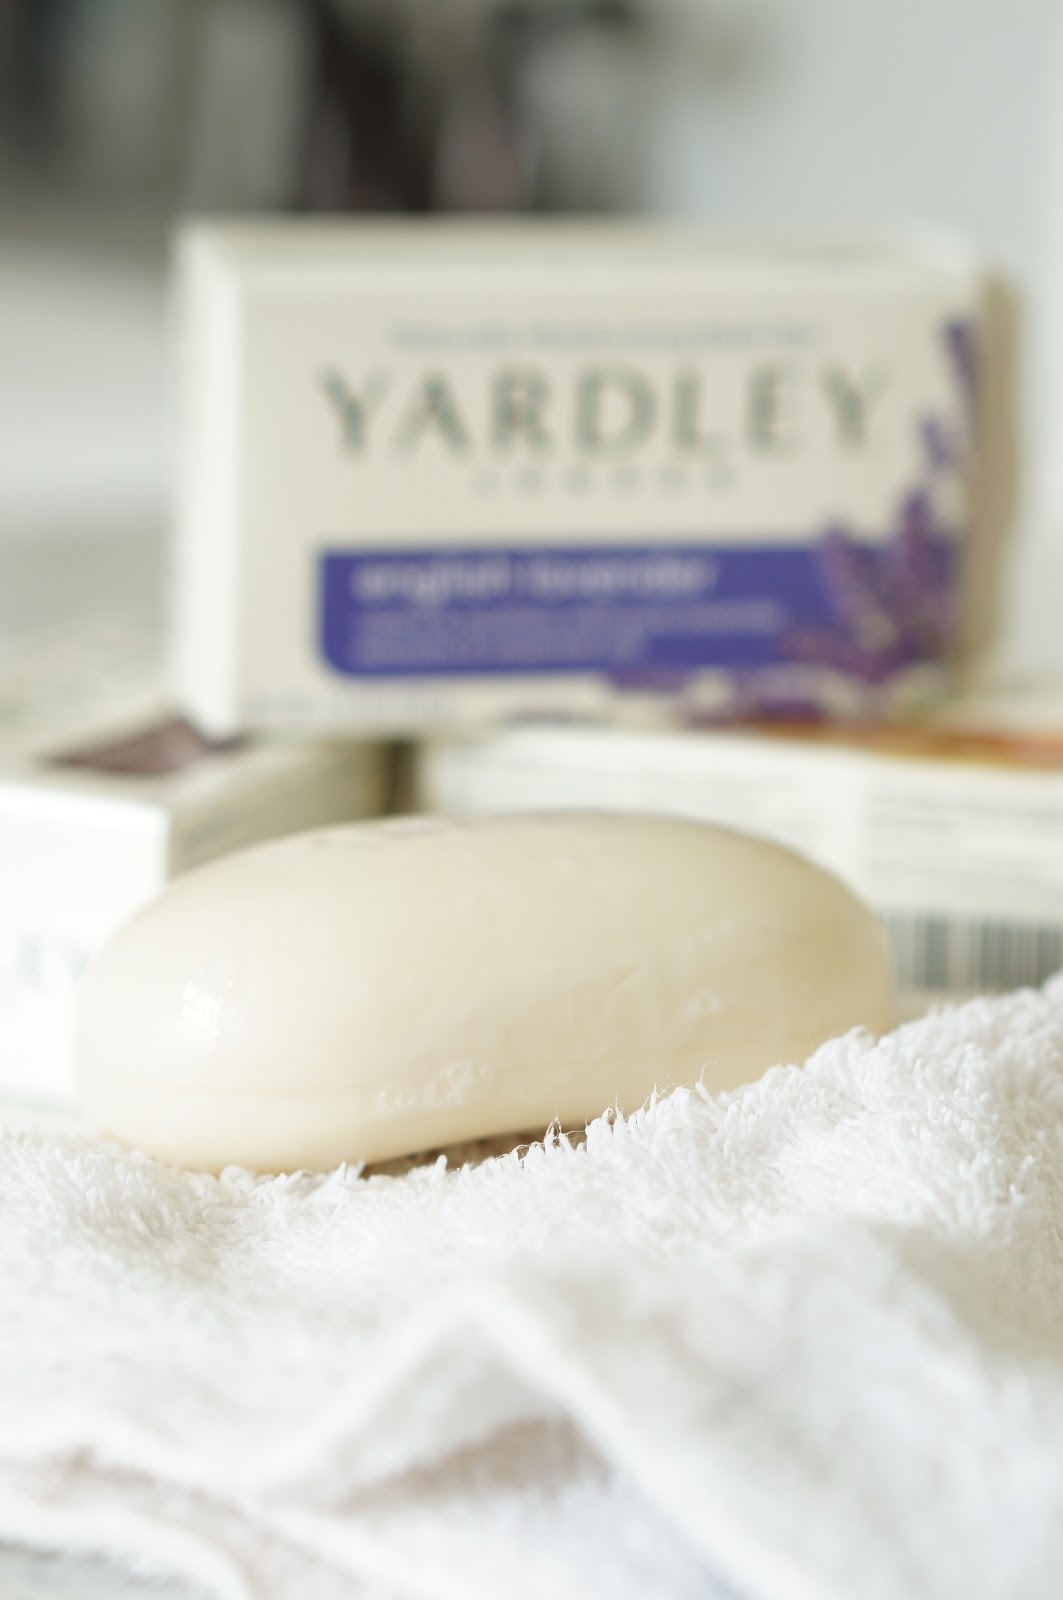 Popular North Carolina style blogger Rebecca Lately shares her pamper routine with Yardley Soaps.  Click here to read her three tips on fitting in me time!